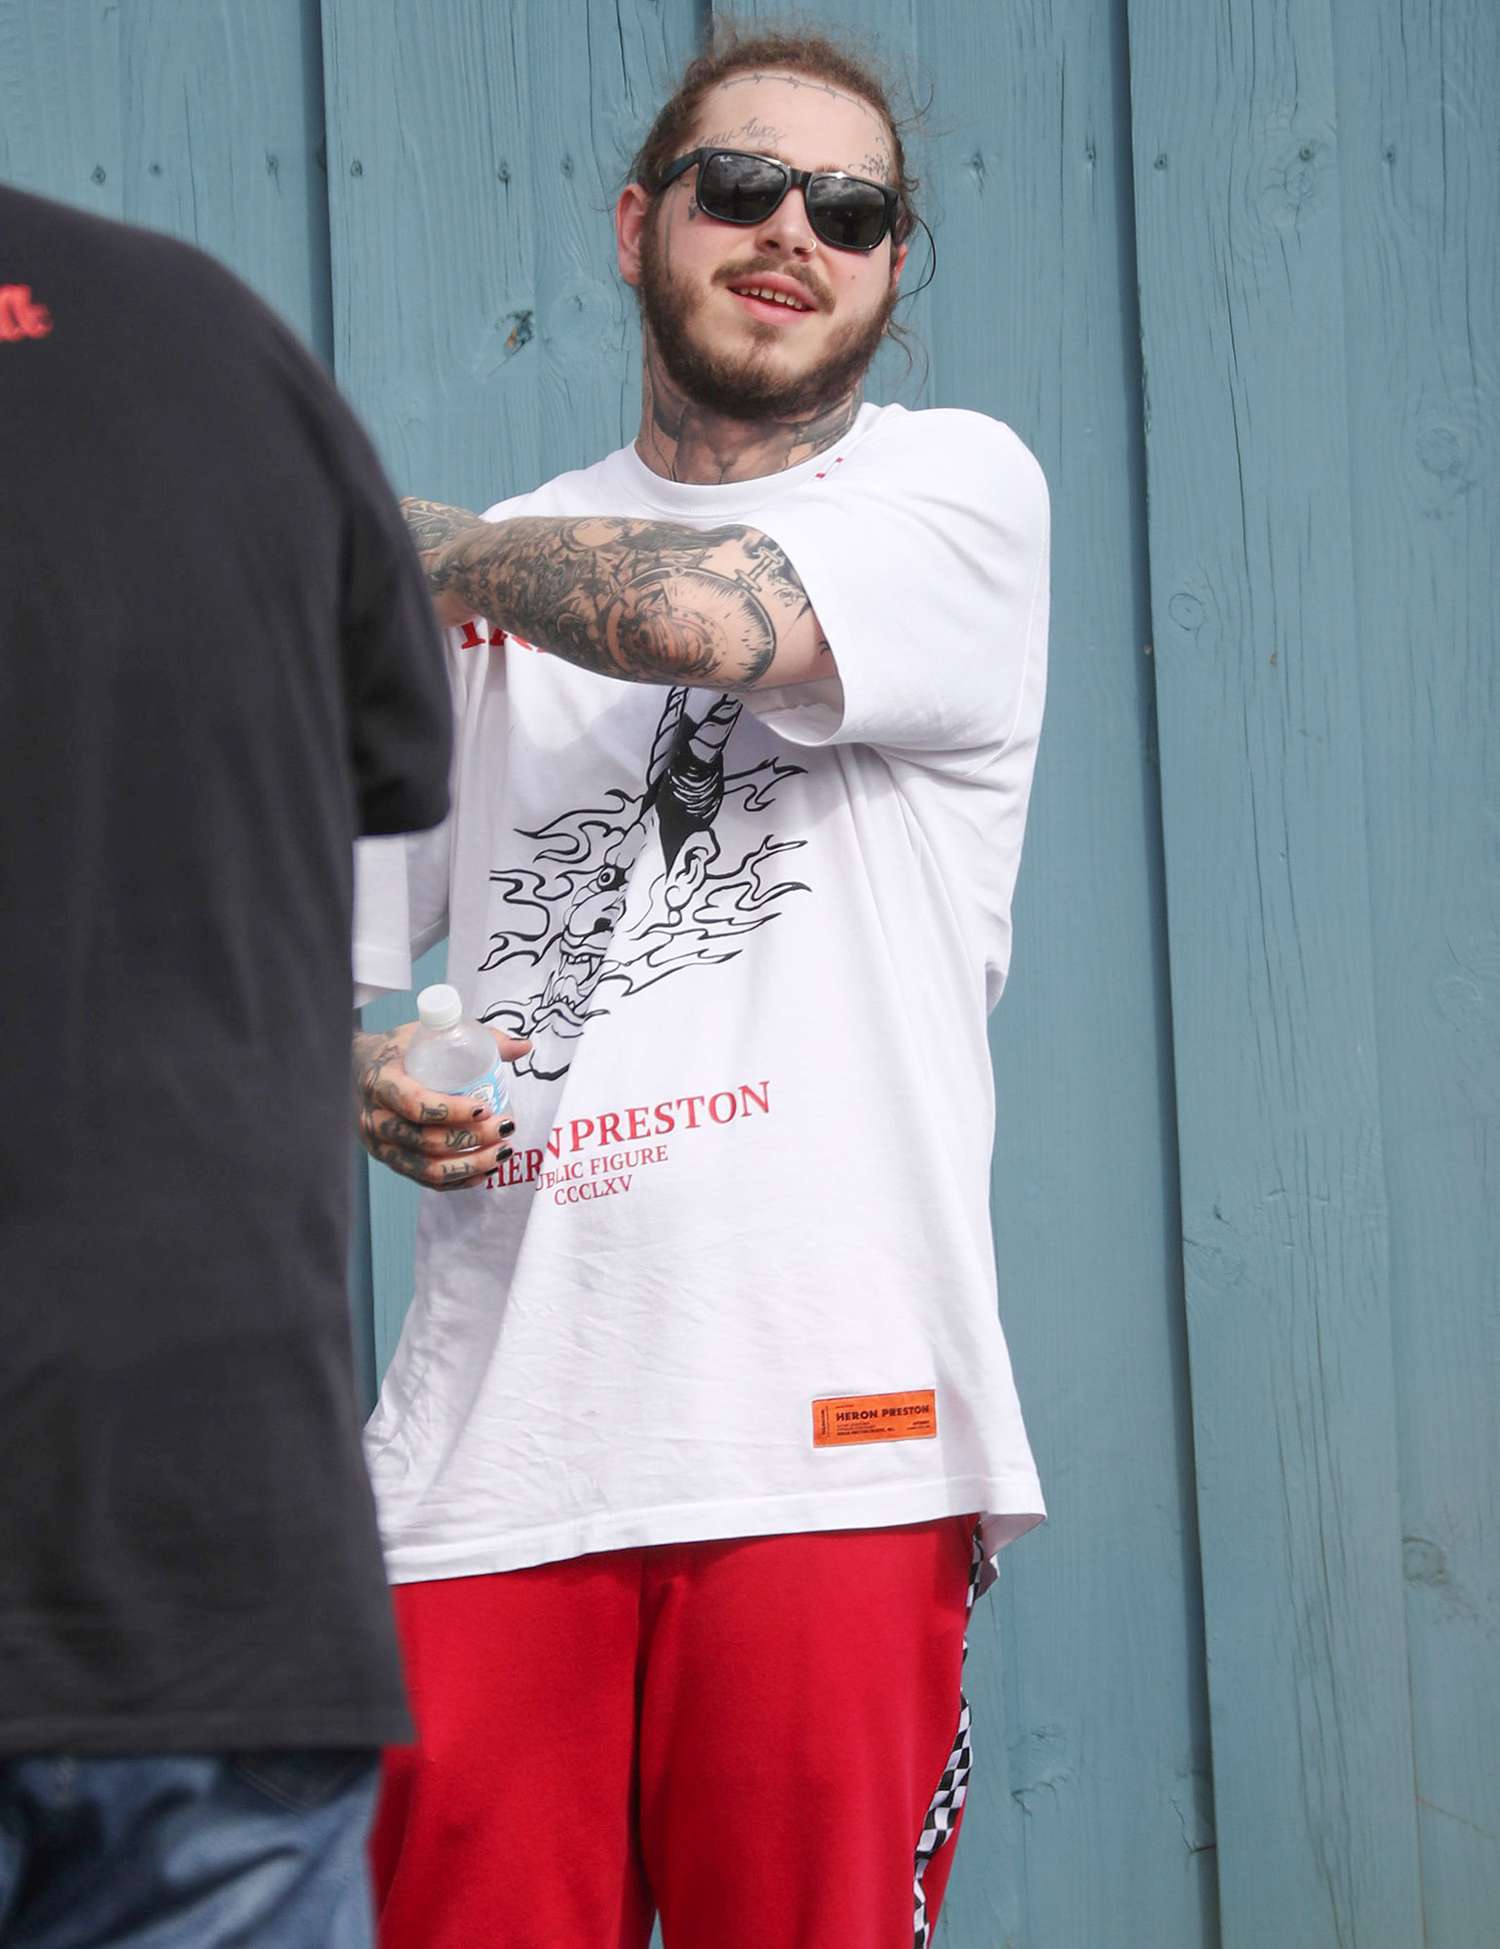 Post Malone is Spotted on Solid Ground Following an Emergency Landing of His Private Jet at Stewart Airport in New Windsor, New York.